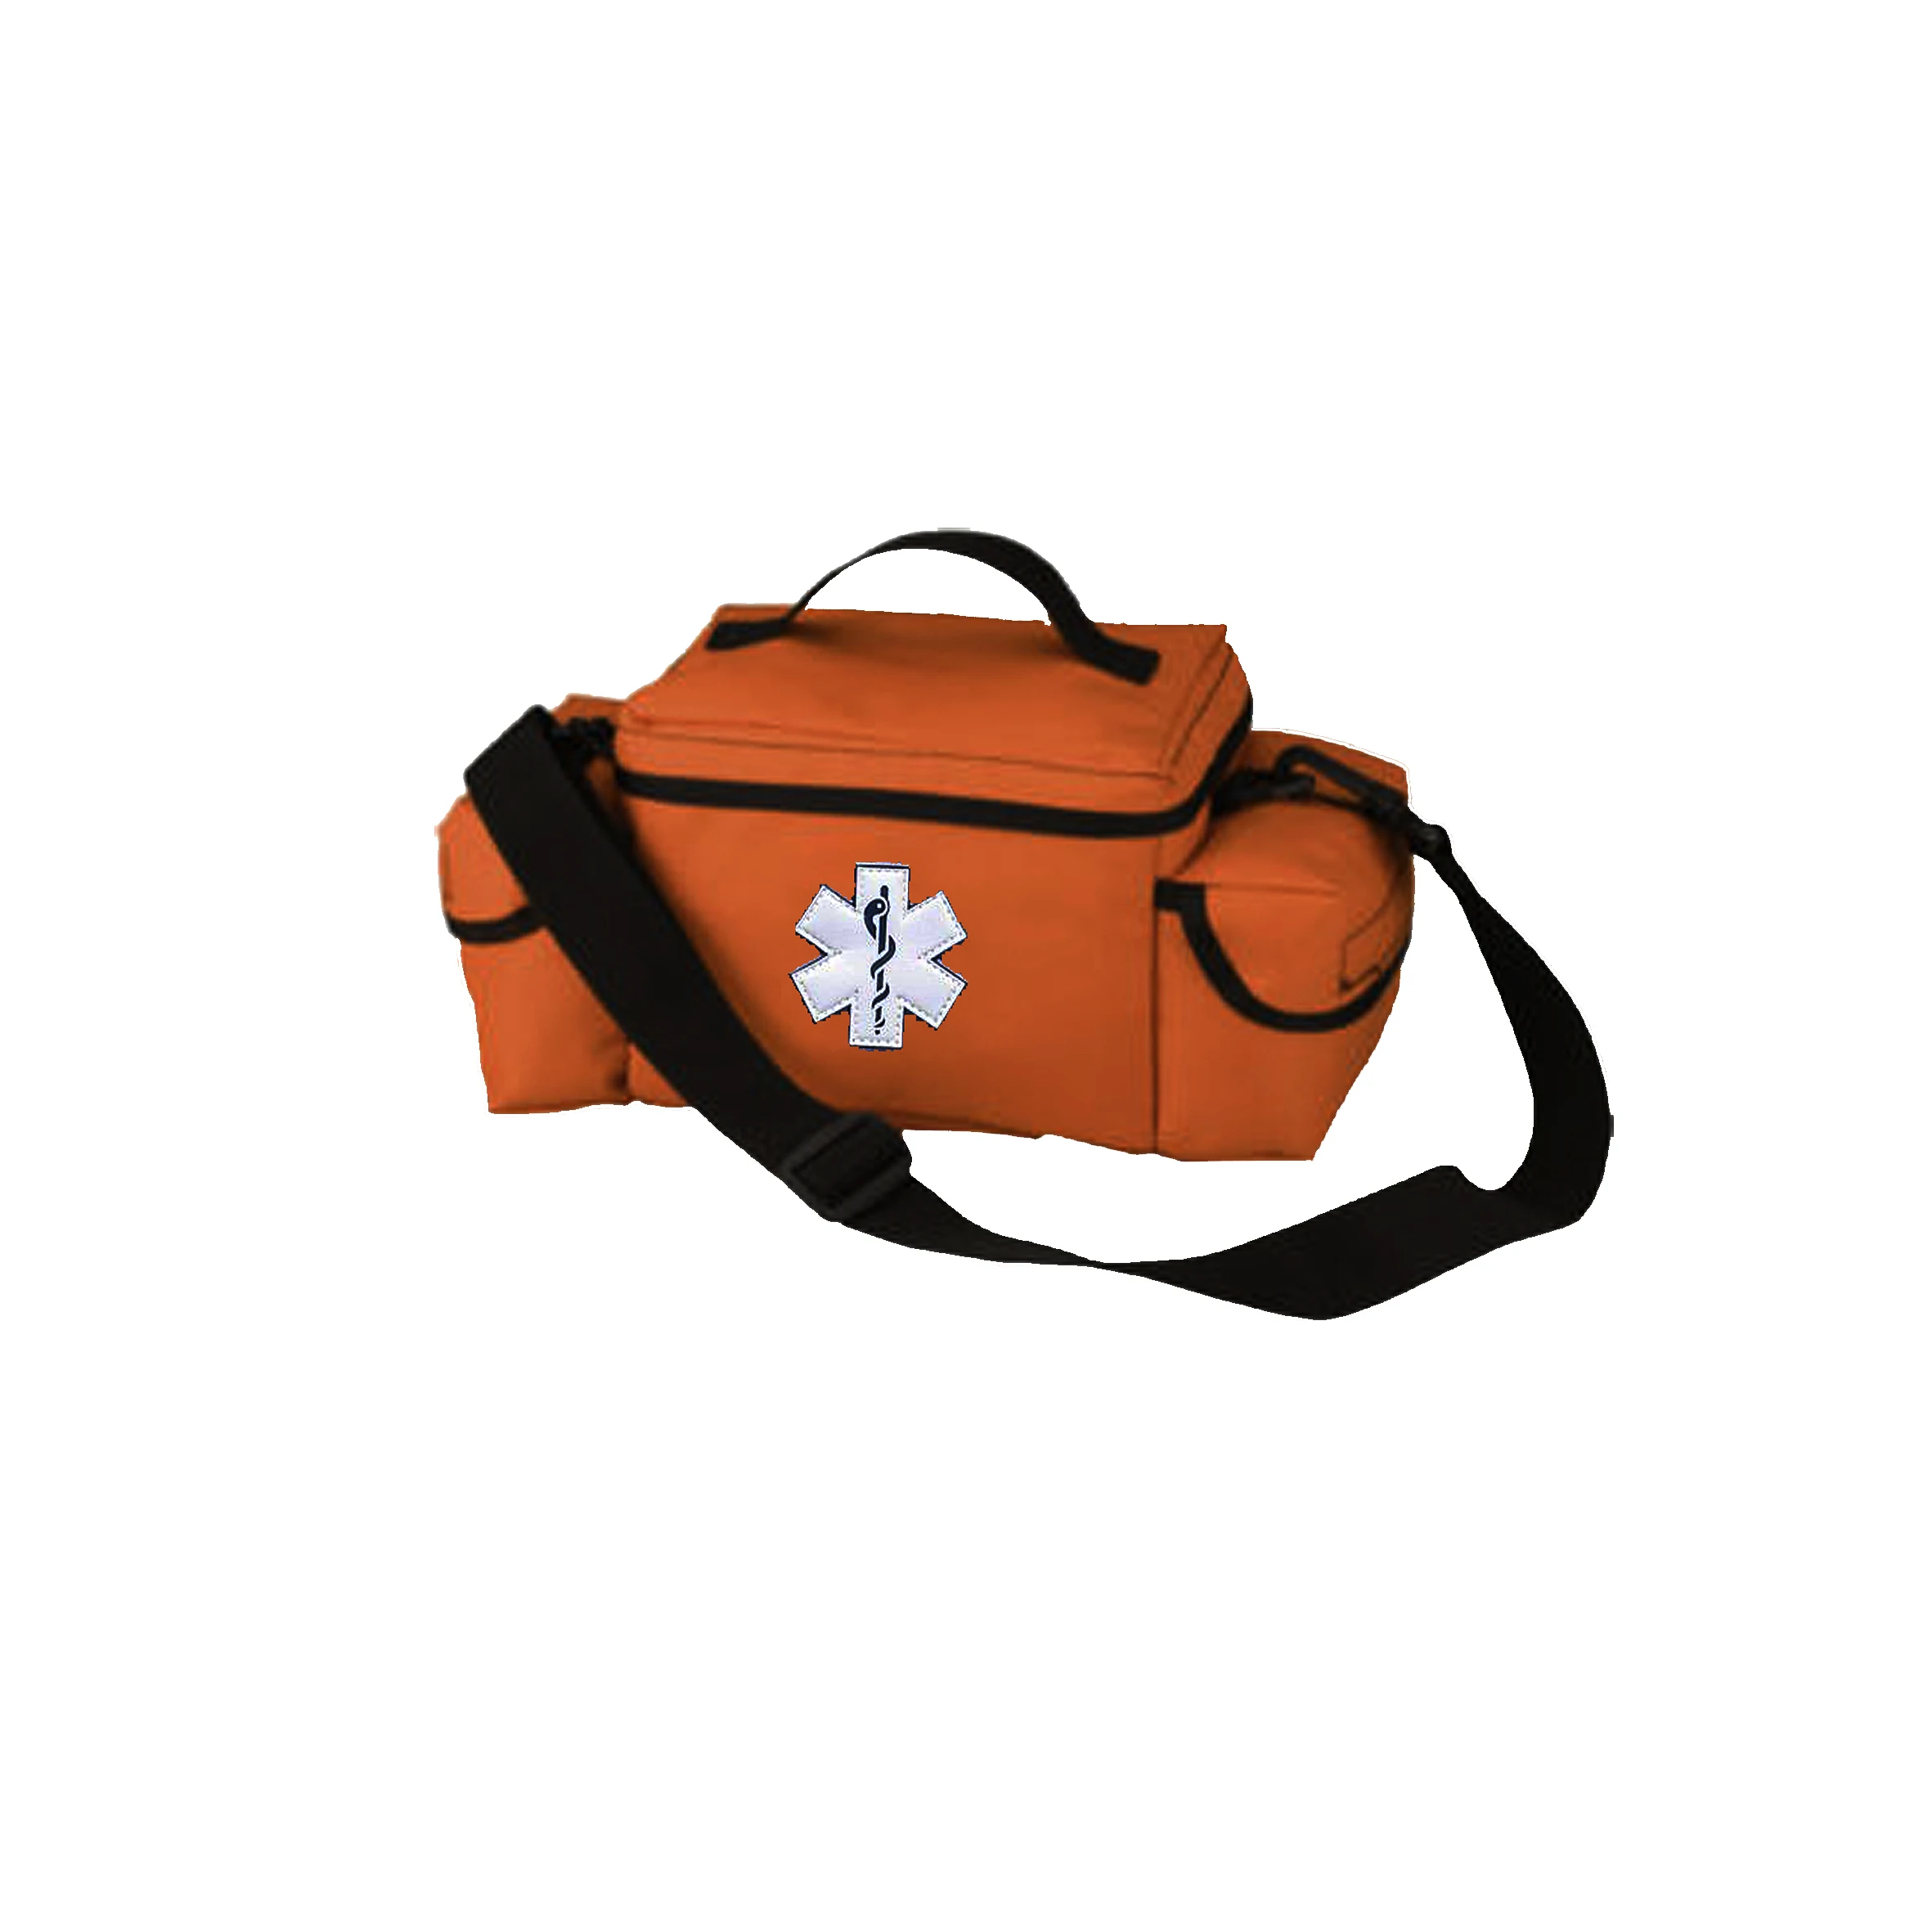 First Aid Kit Medical Emergency Trauma Bag For Home Used Or Camping Hiking